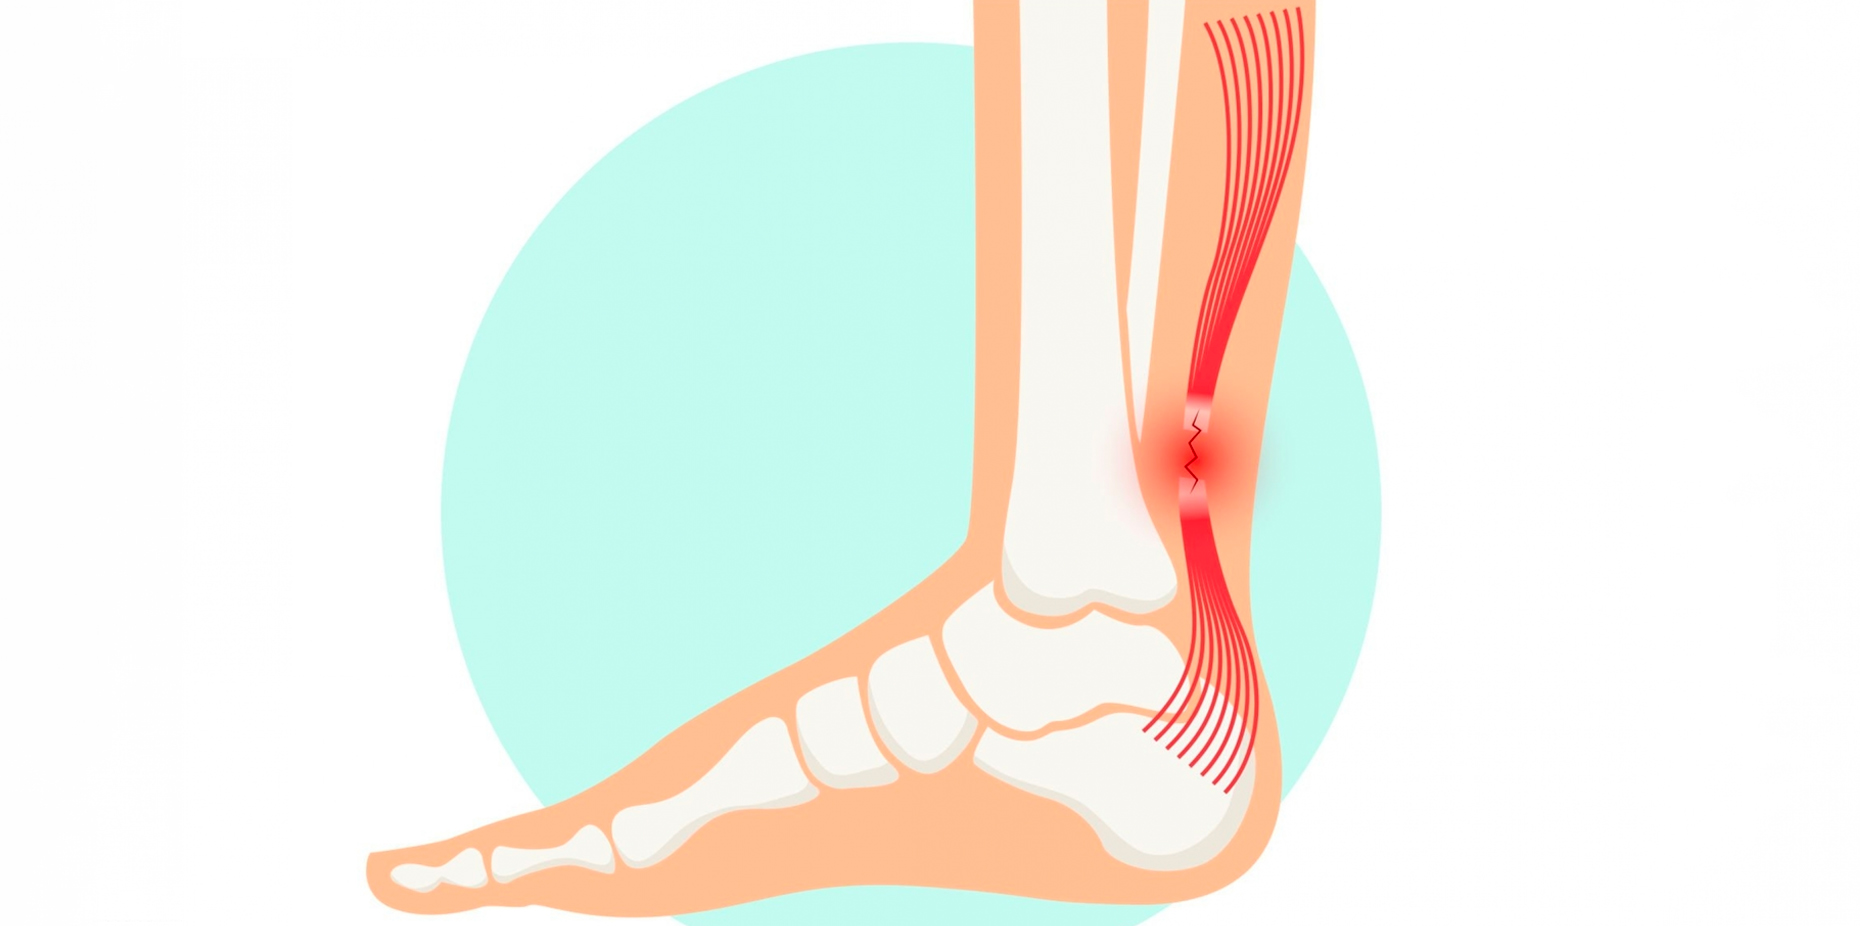 Tendon Conditions: Types, Causes, Treatments and More